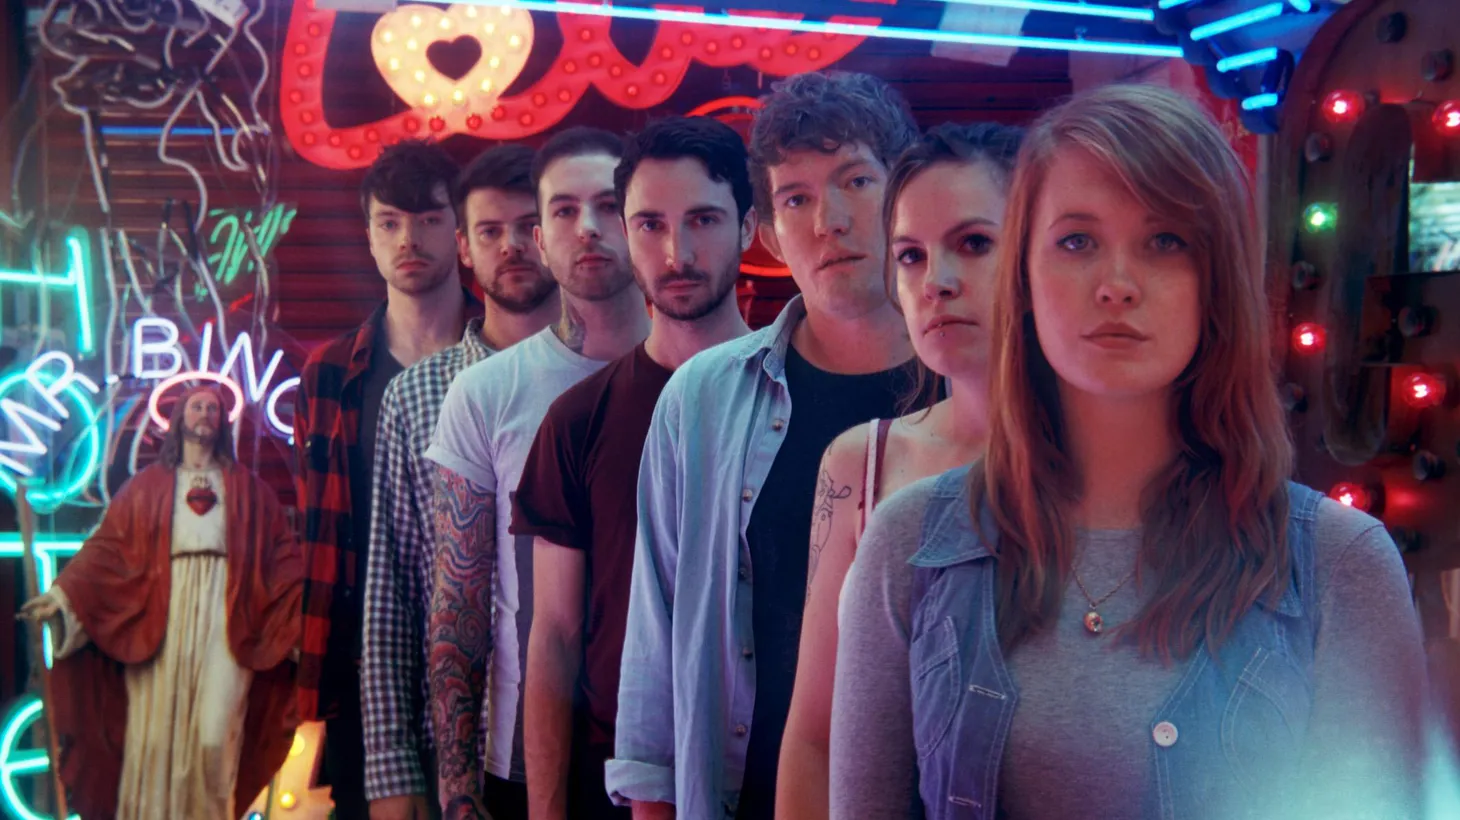 Los Campesinos! are a collective from Wales who specialize in catchy indie pop, even when they're singing breakup songs...